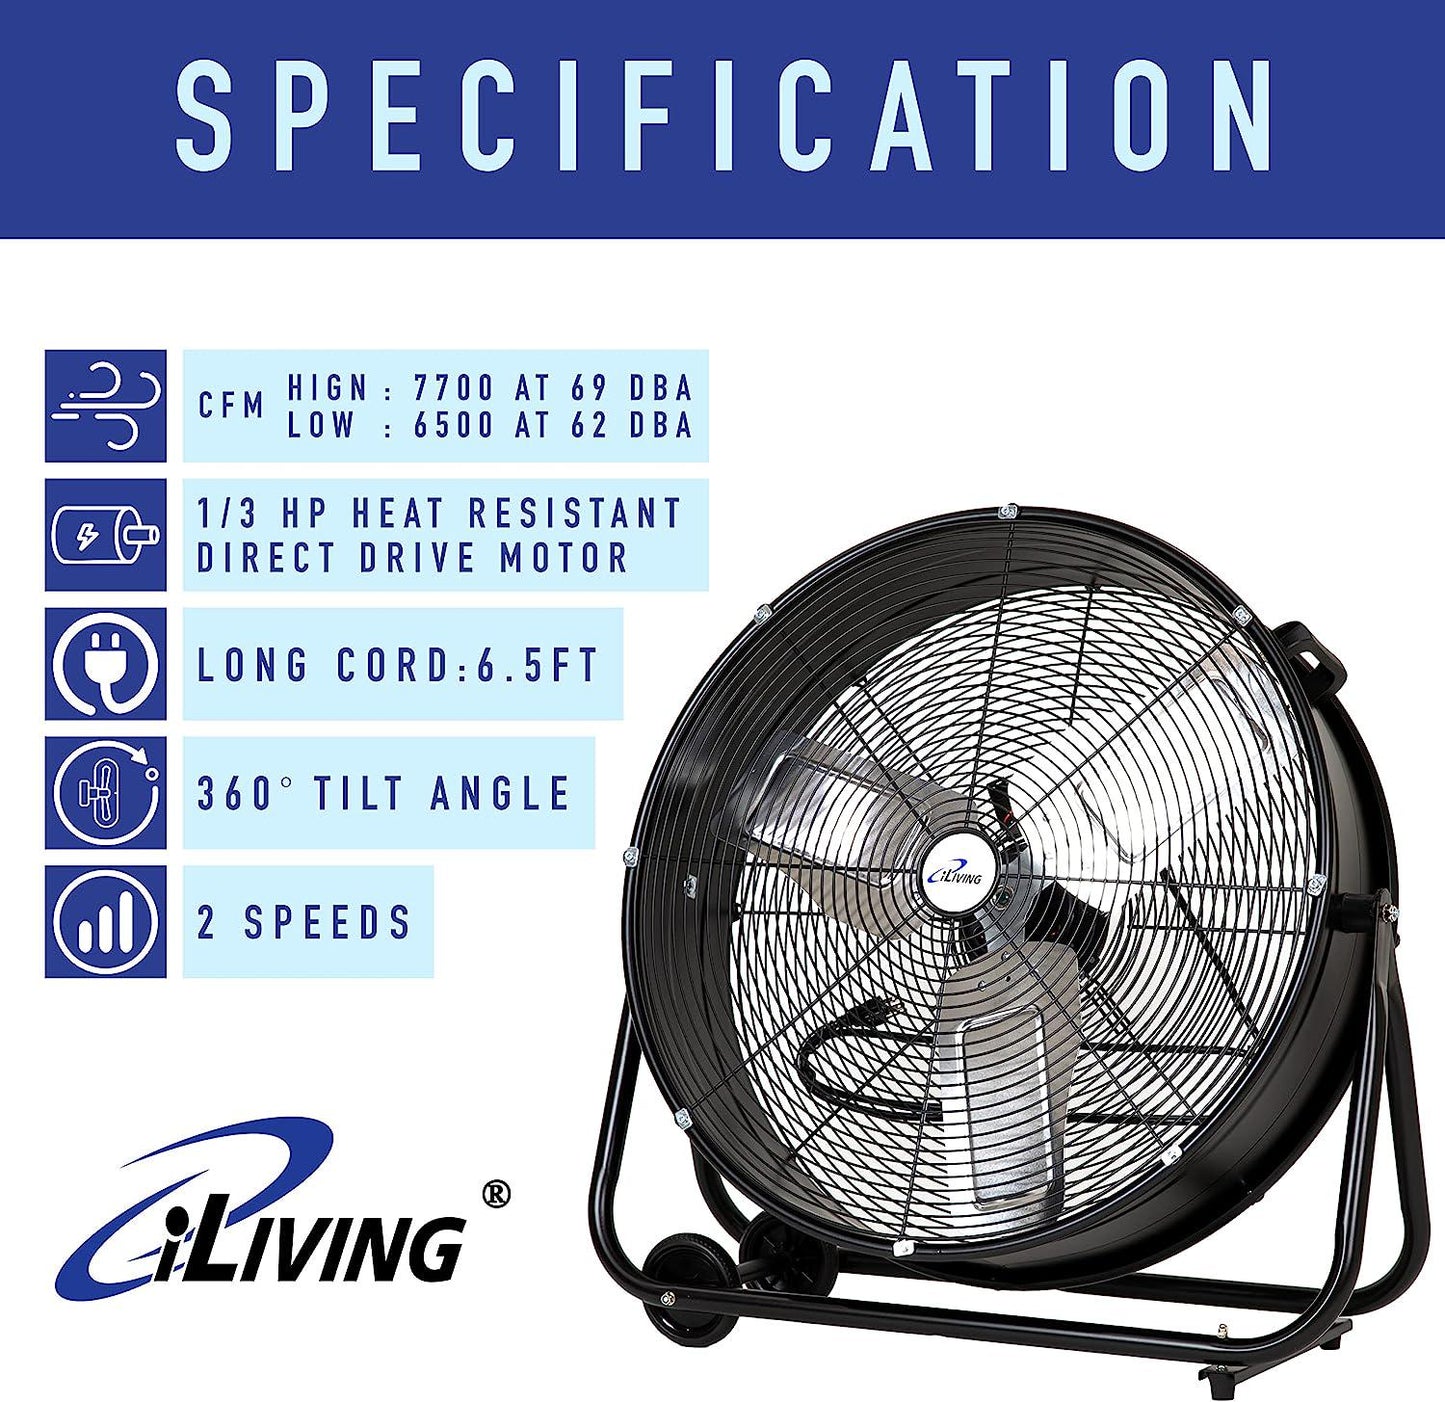 24 High Velocity Drum Fan Industrial, Commercial, Residential Air Circulator for Garage, Shop, Patio, Barn, Greenhouse, Speed Control 7700CFM, UL Listed